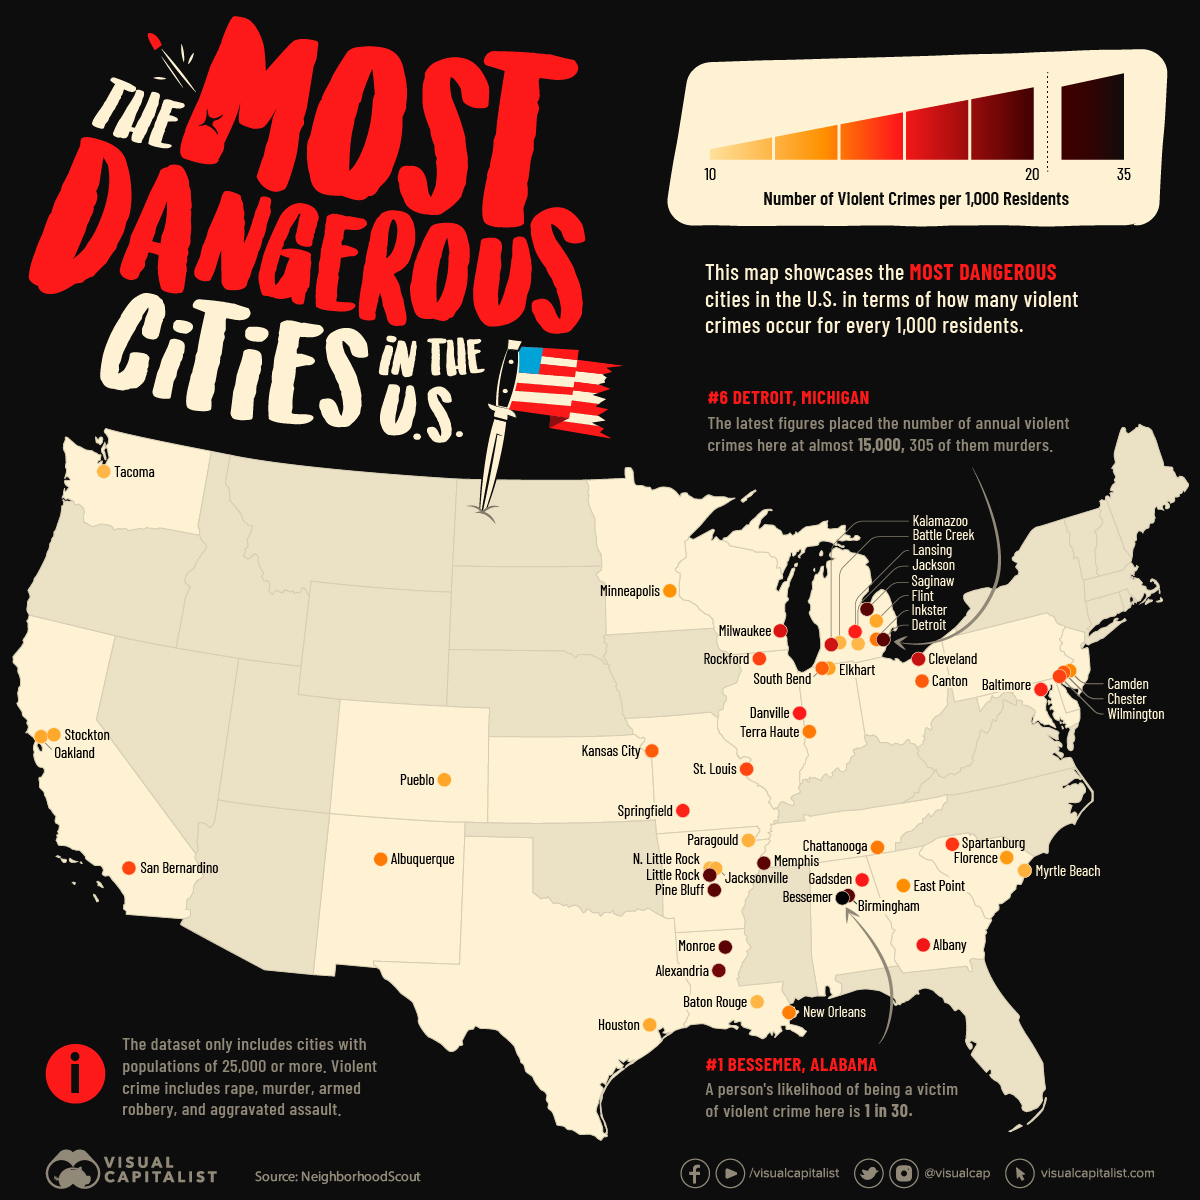 Mapped The Most Dangerous Cities in the U.S.